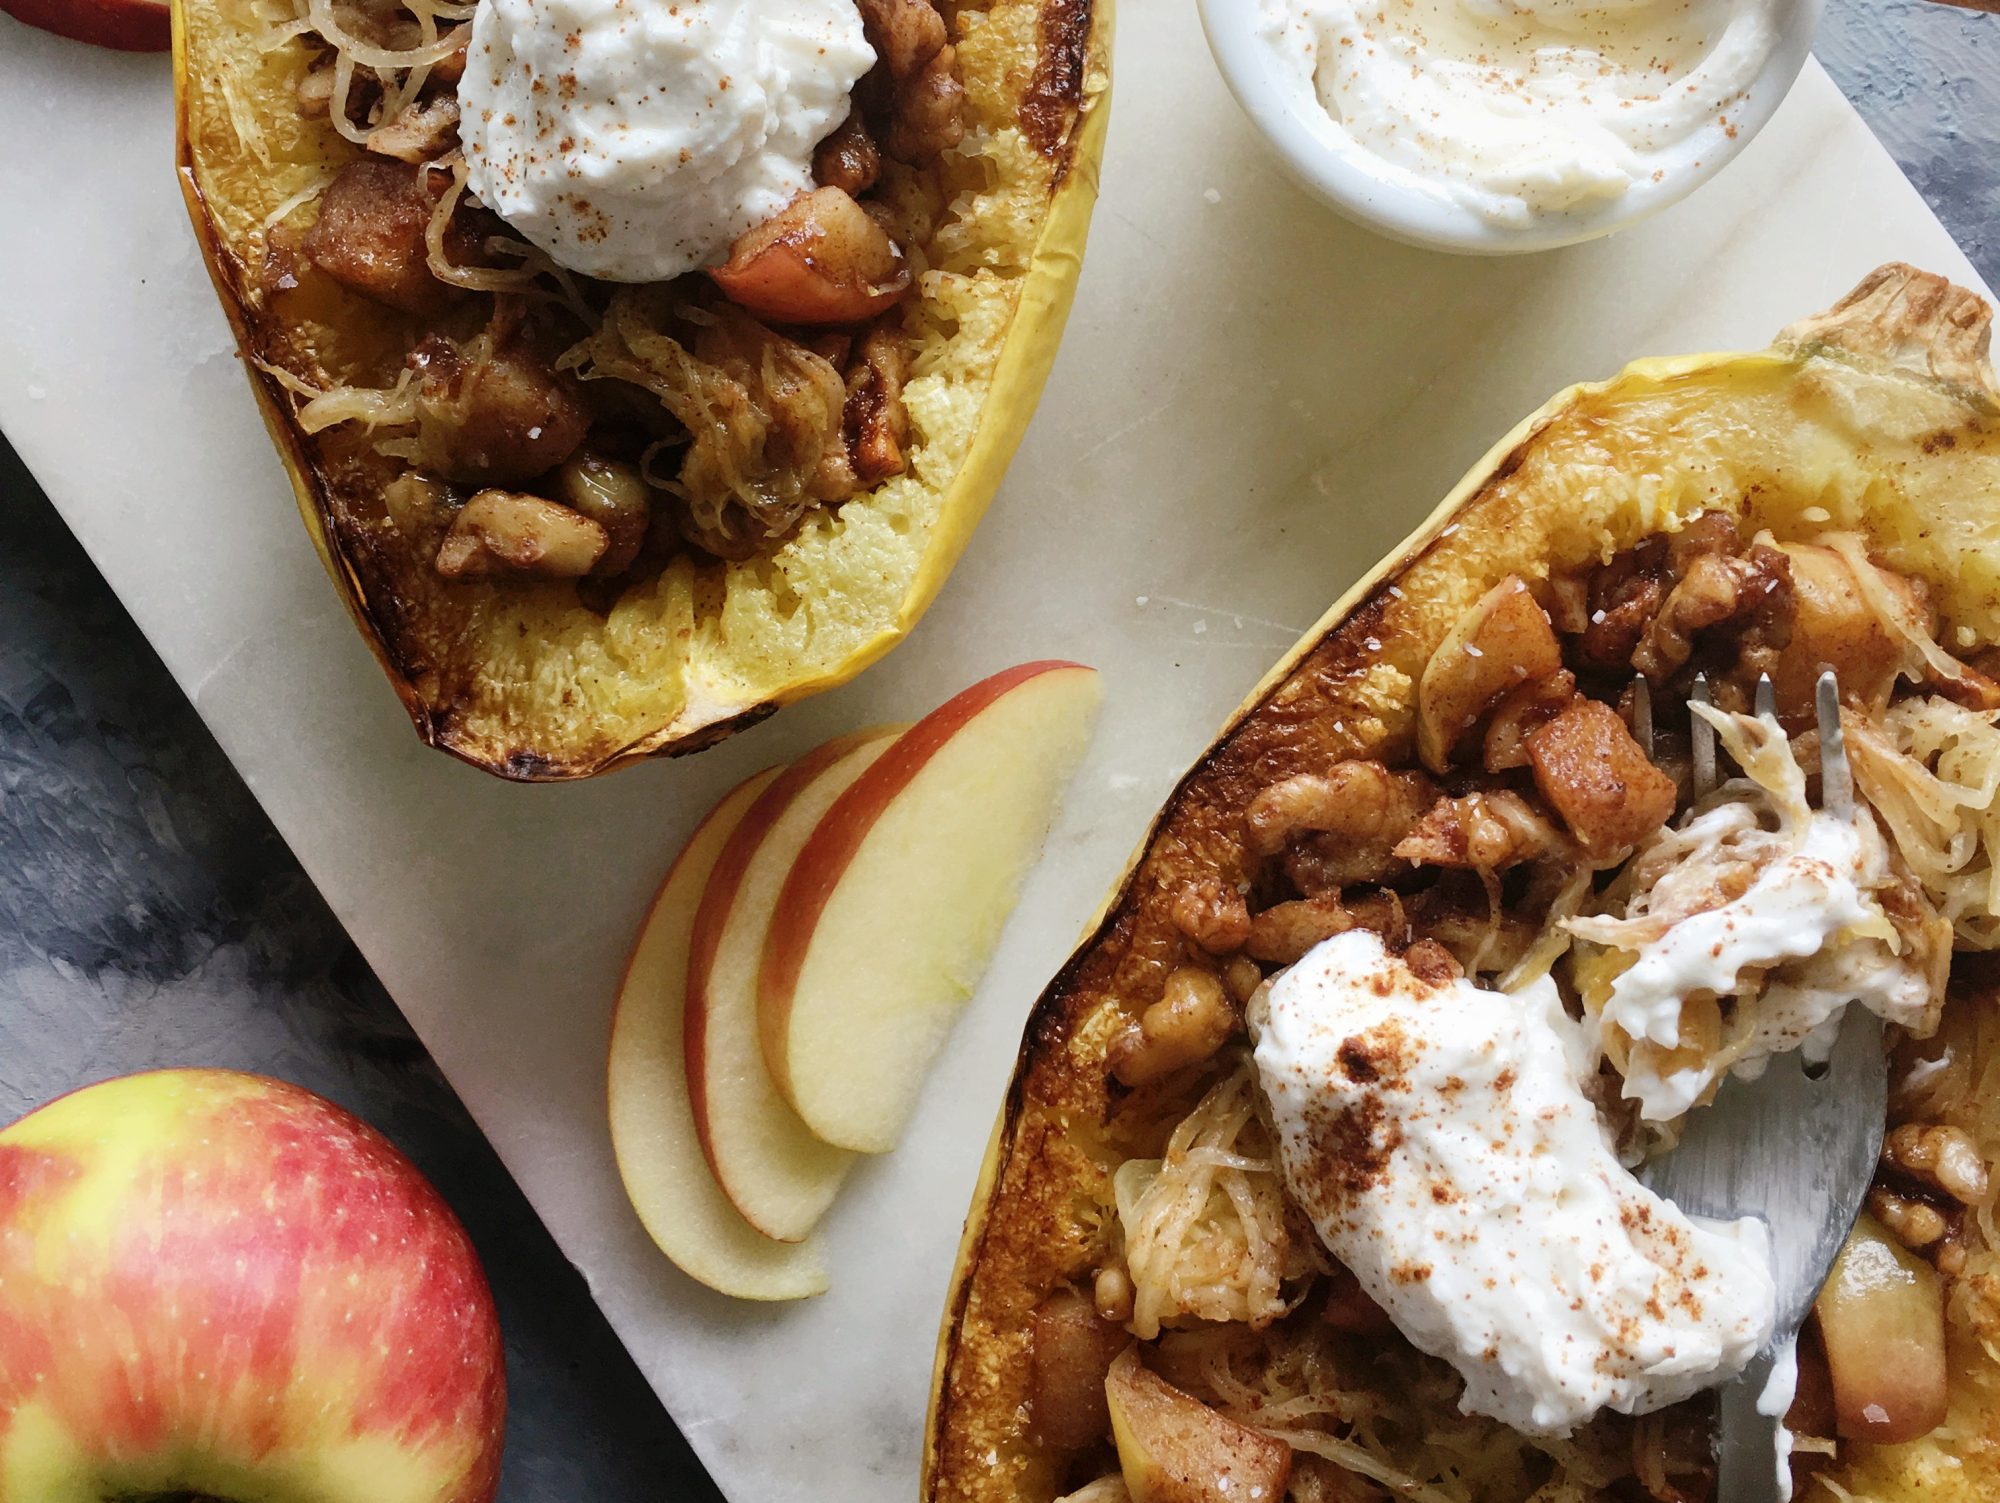 Dessert Spaghetti Squash with Apples, Walnuts, and Cinnamon Goat Cheese